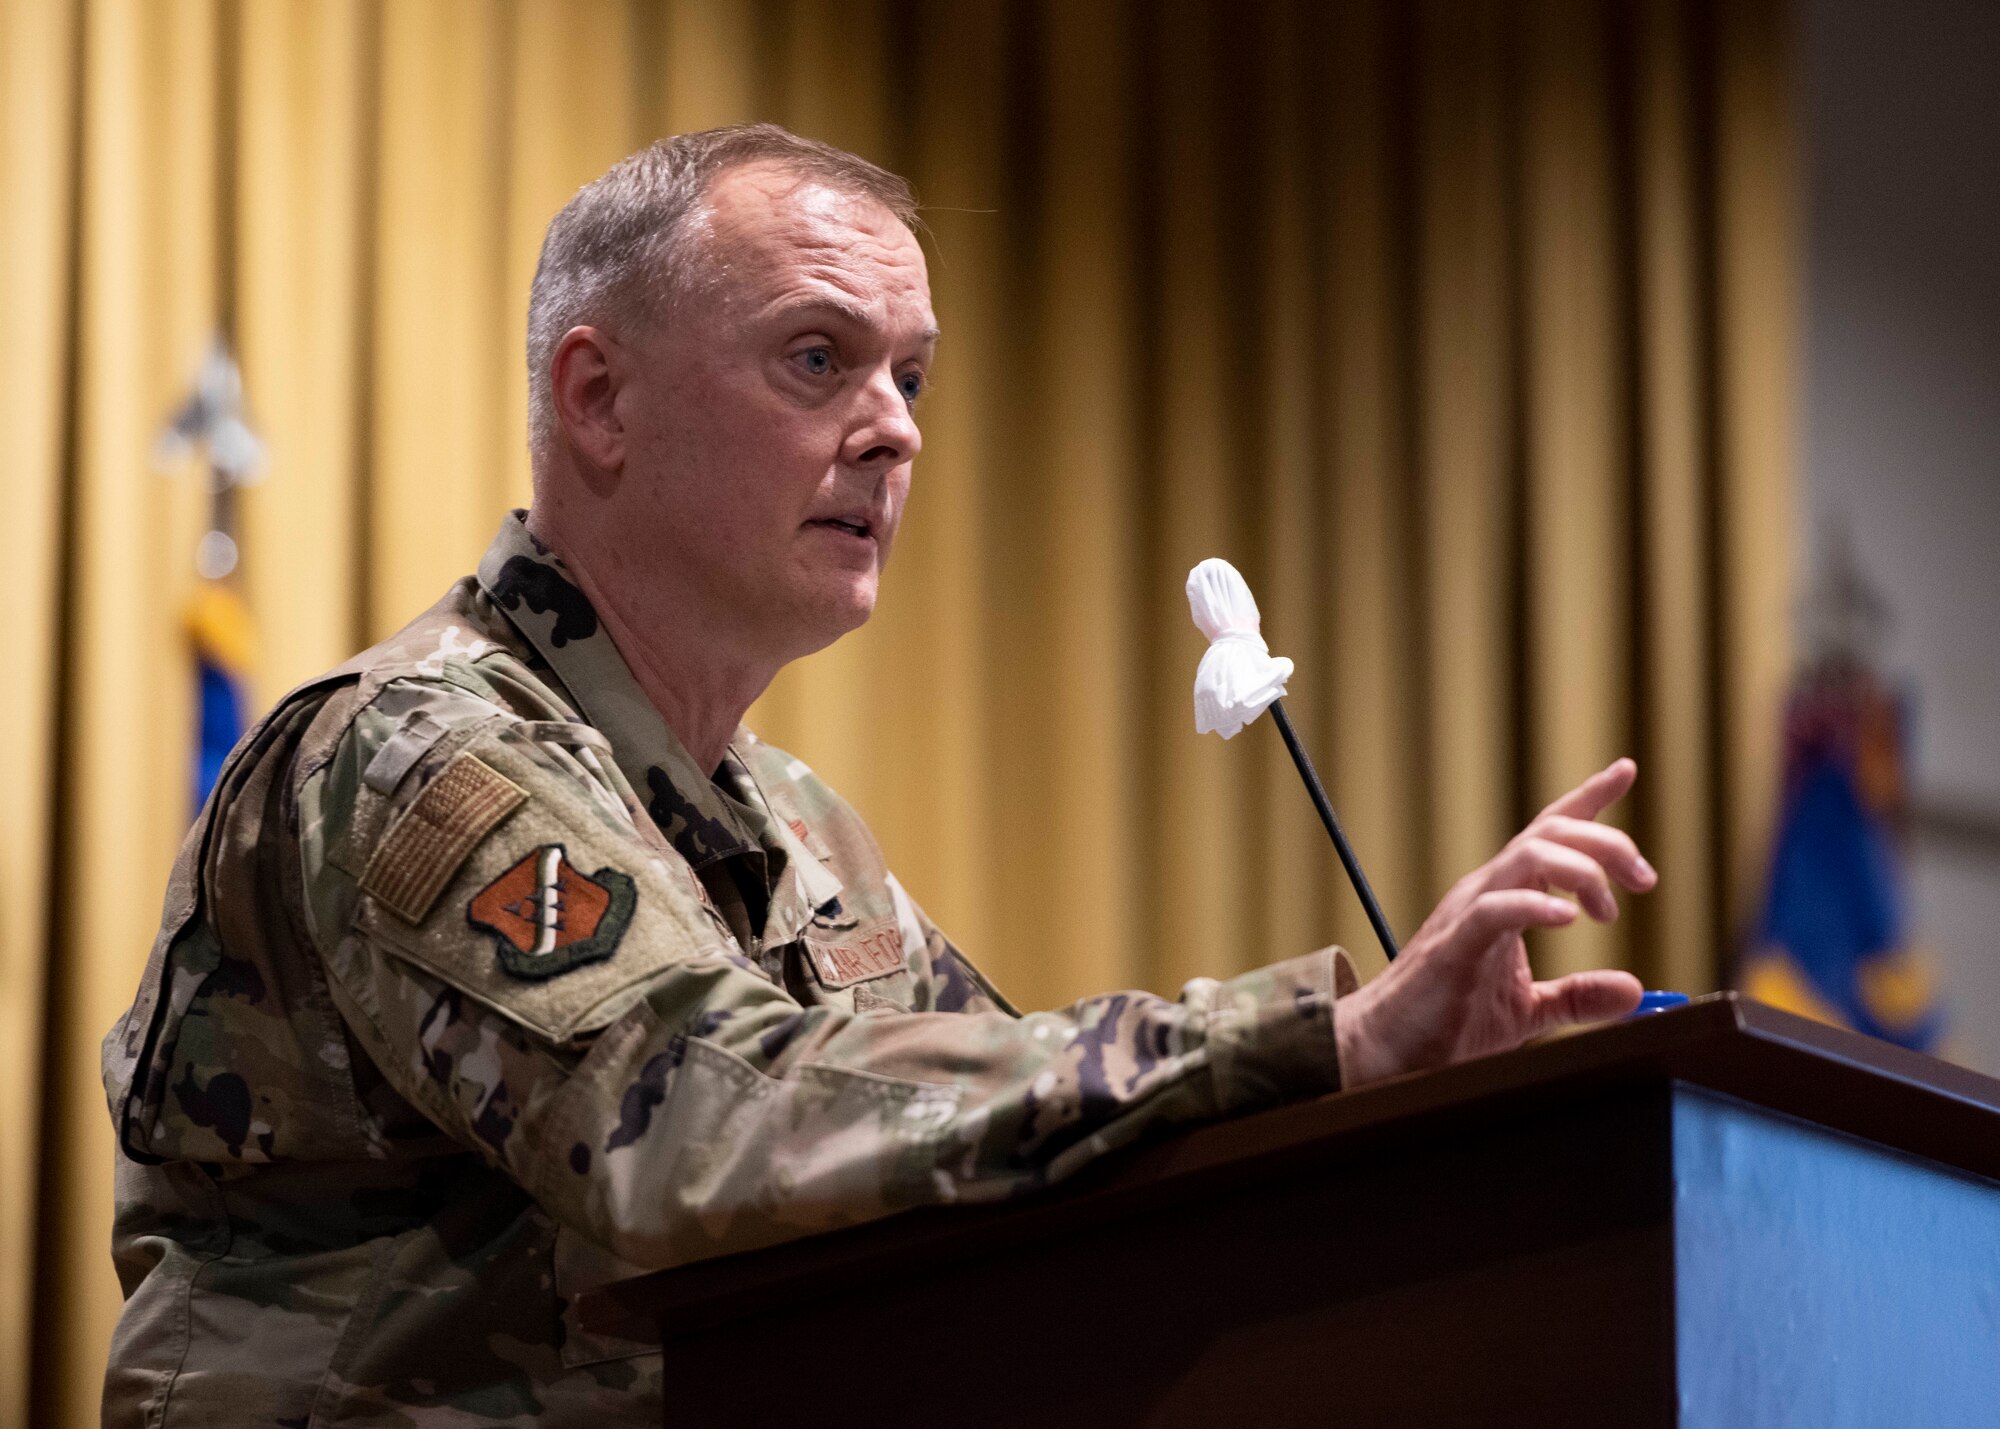 Col. John Creel, 39th Air Base Wing commander, speaks from a stage podium to Airmen in-person and online during a commander’s call at Incirlik Air Base, Turkey, Aug. 25, 2020